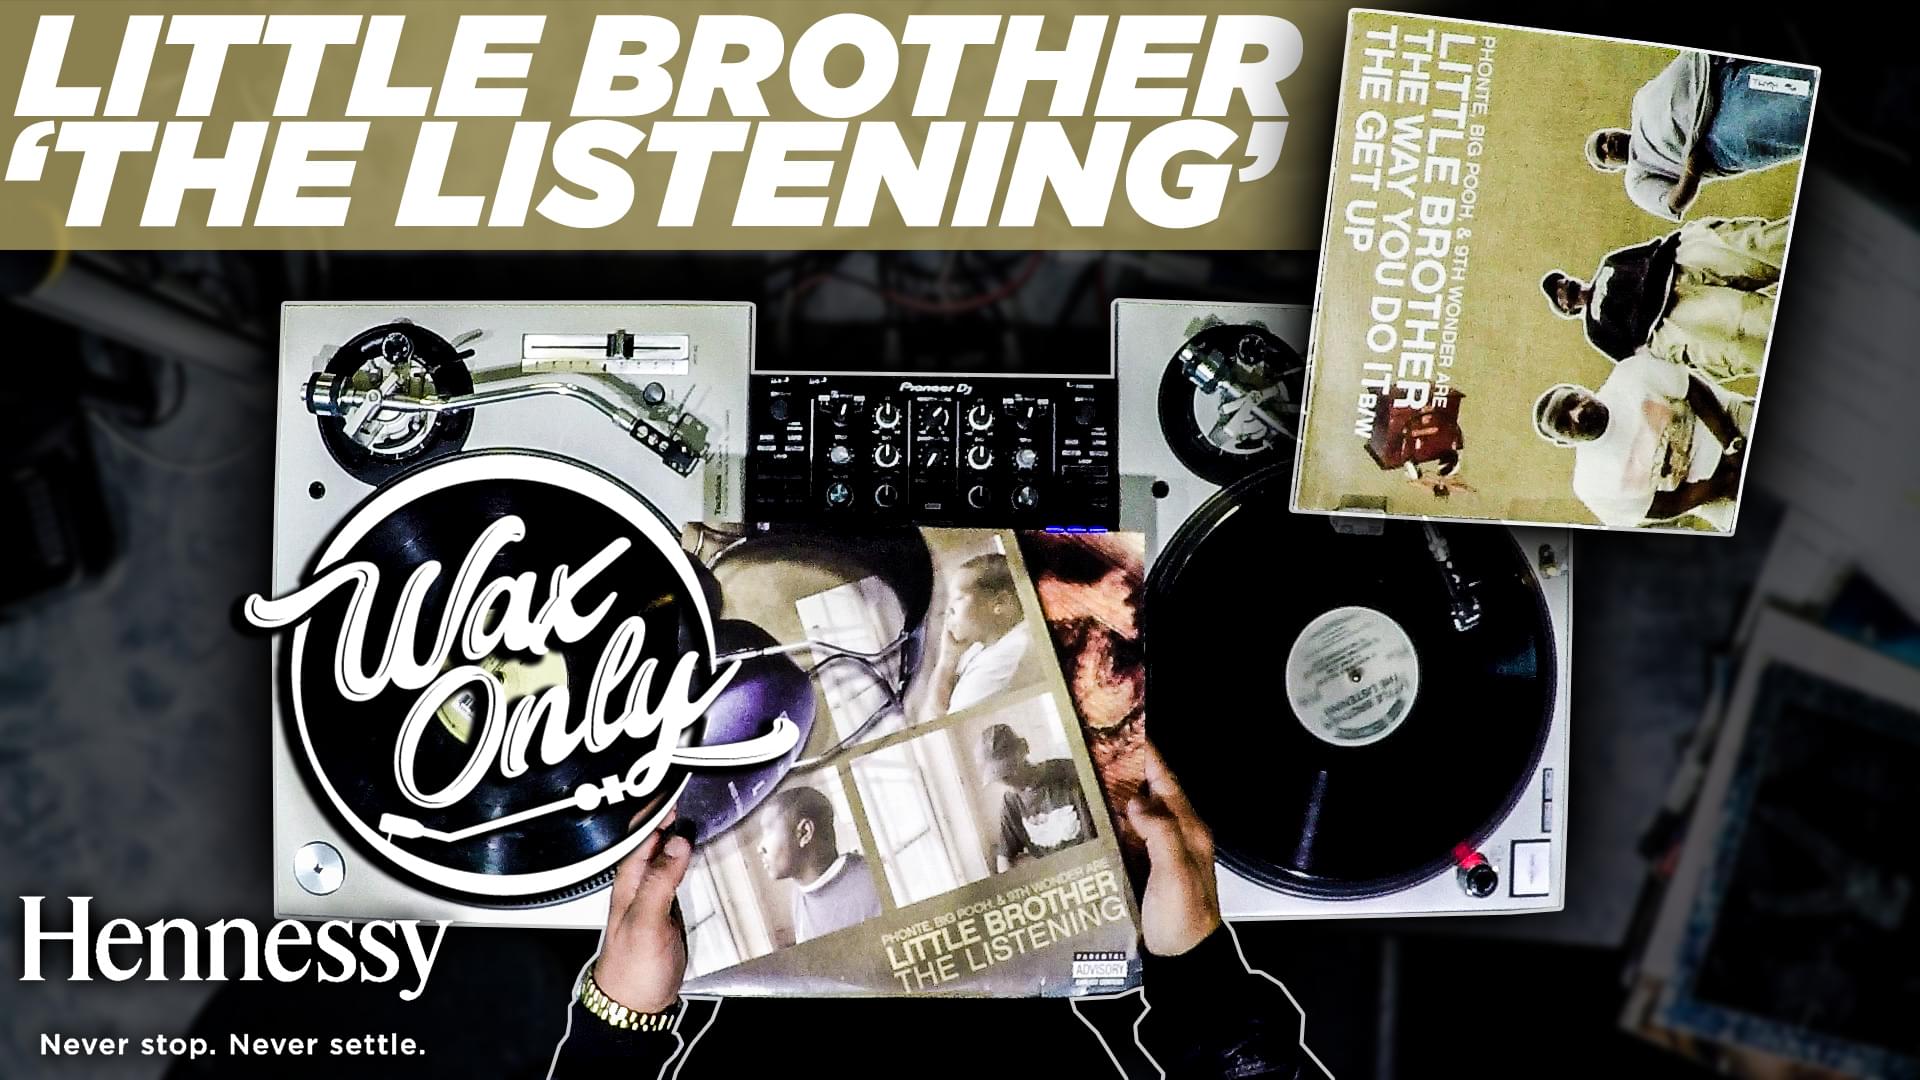 [WAX ONLY] VinRican Discovers Samples On Little Brother’s ‘The Listening’